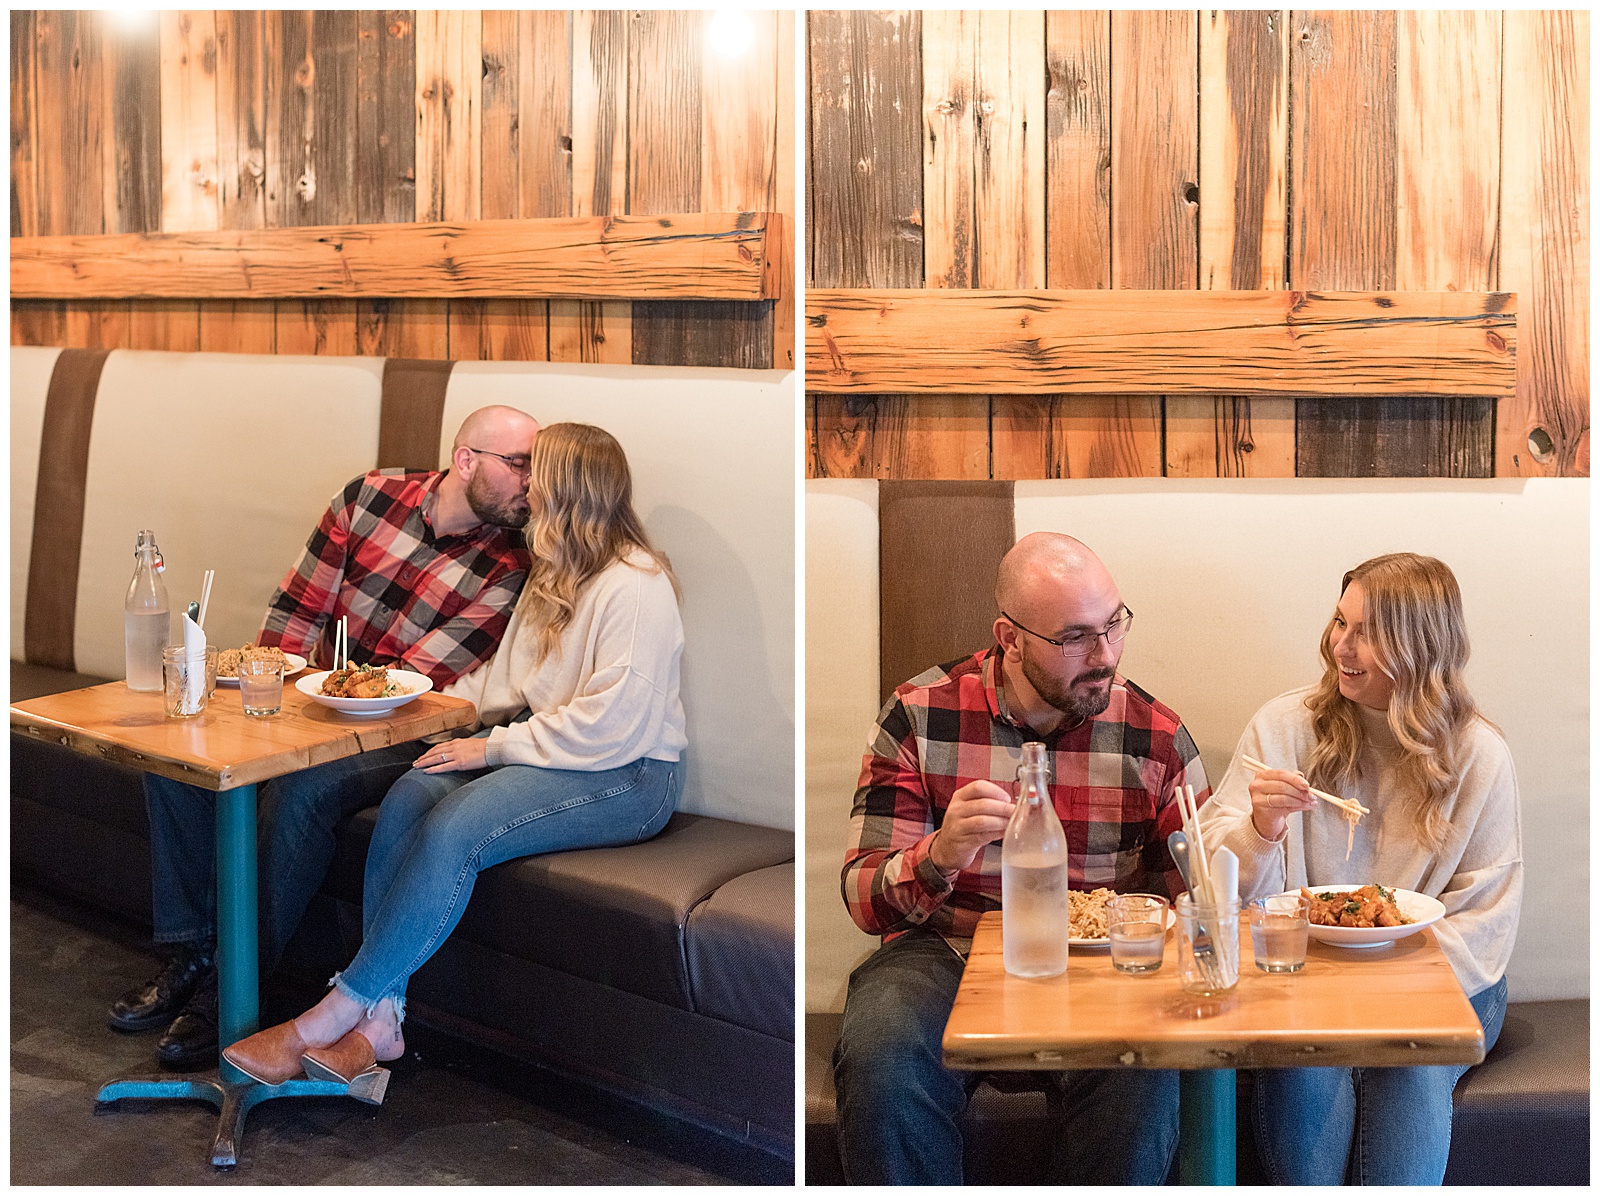 the couple is sitting in a booth kissing with the guy on the left leaning towards the girl on the right with hand on her lap and legs crossed and their food is sitting on the table, the couple is sitting in the booth and eating their food while smiling and talking in the bar in downtown Pittsburgh